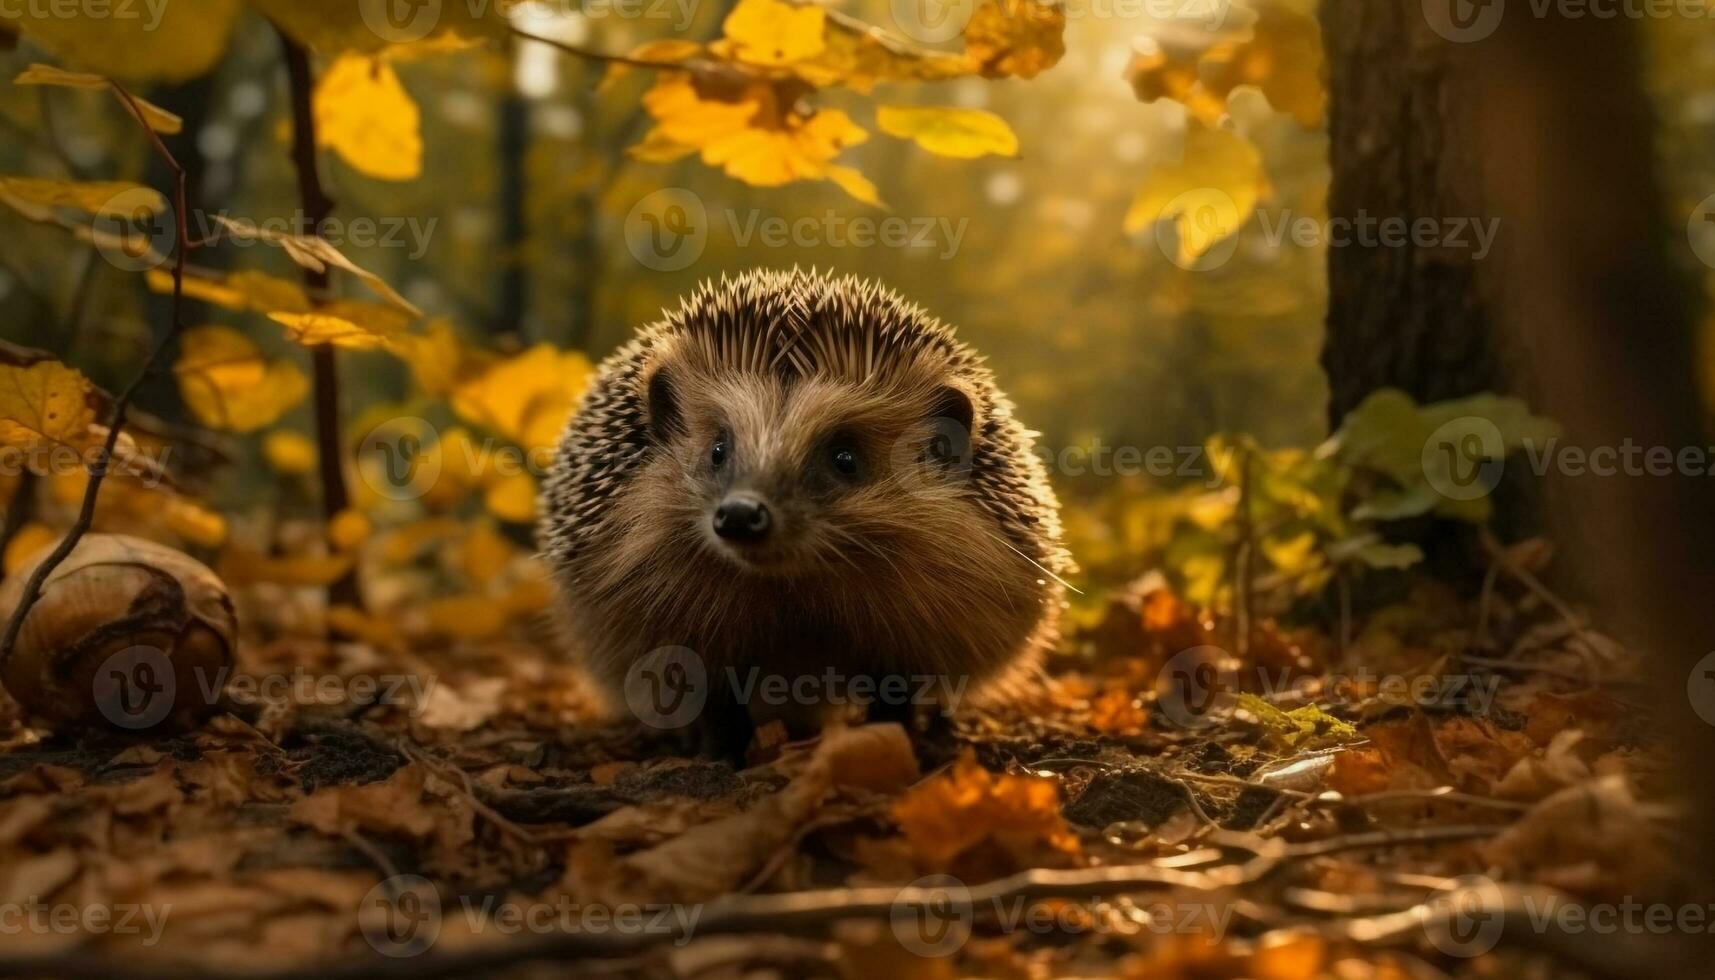 Cute hedgehog sitting on grass, surrounded by autumn leaves generated by AI photo